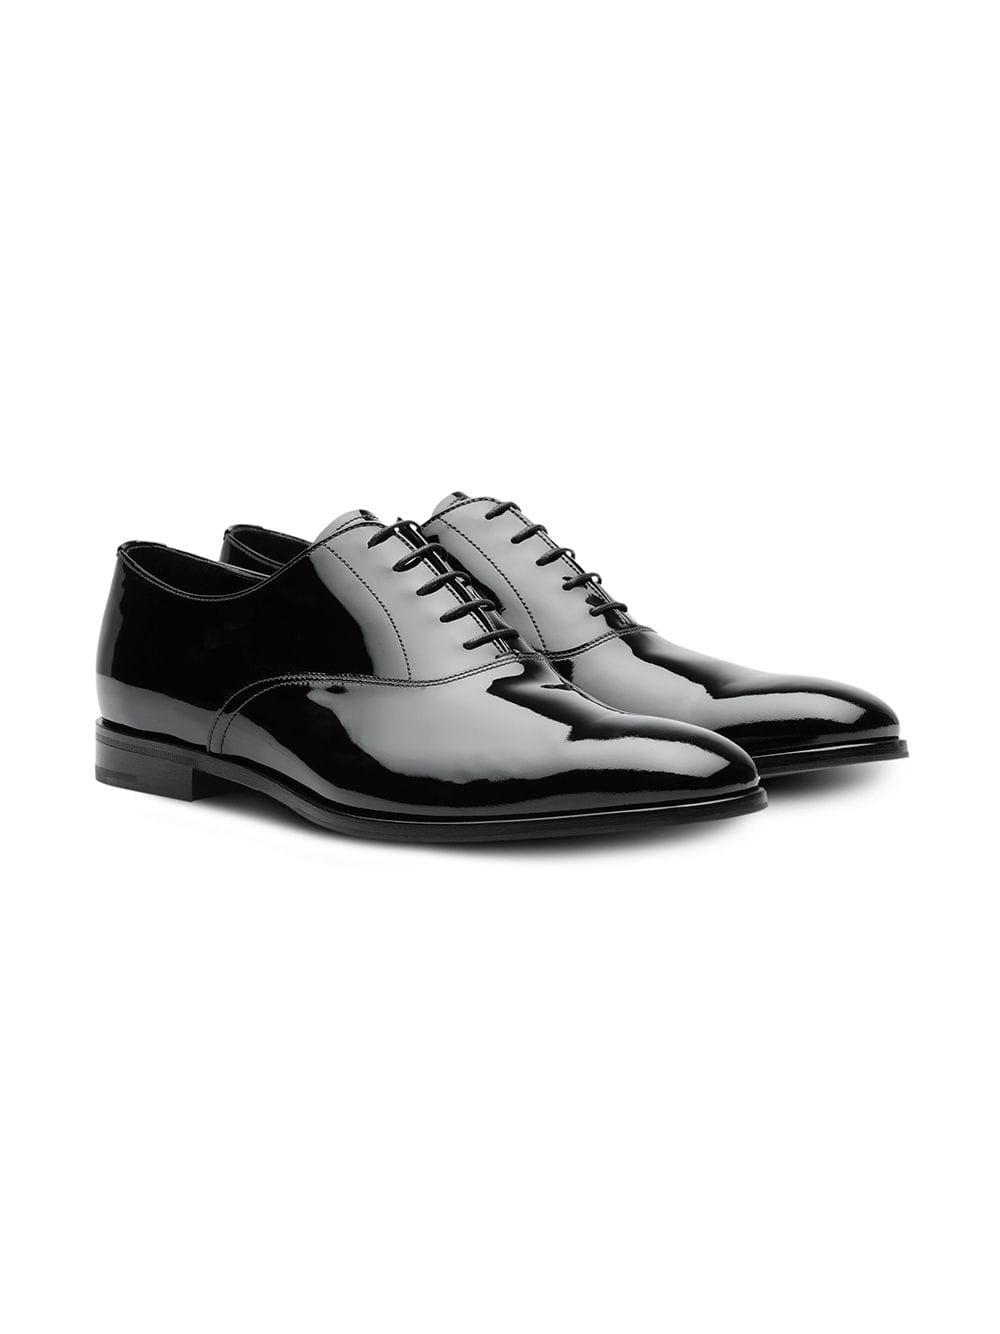 Prada Patent Leather Oxford Shoes in 